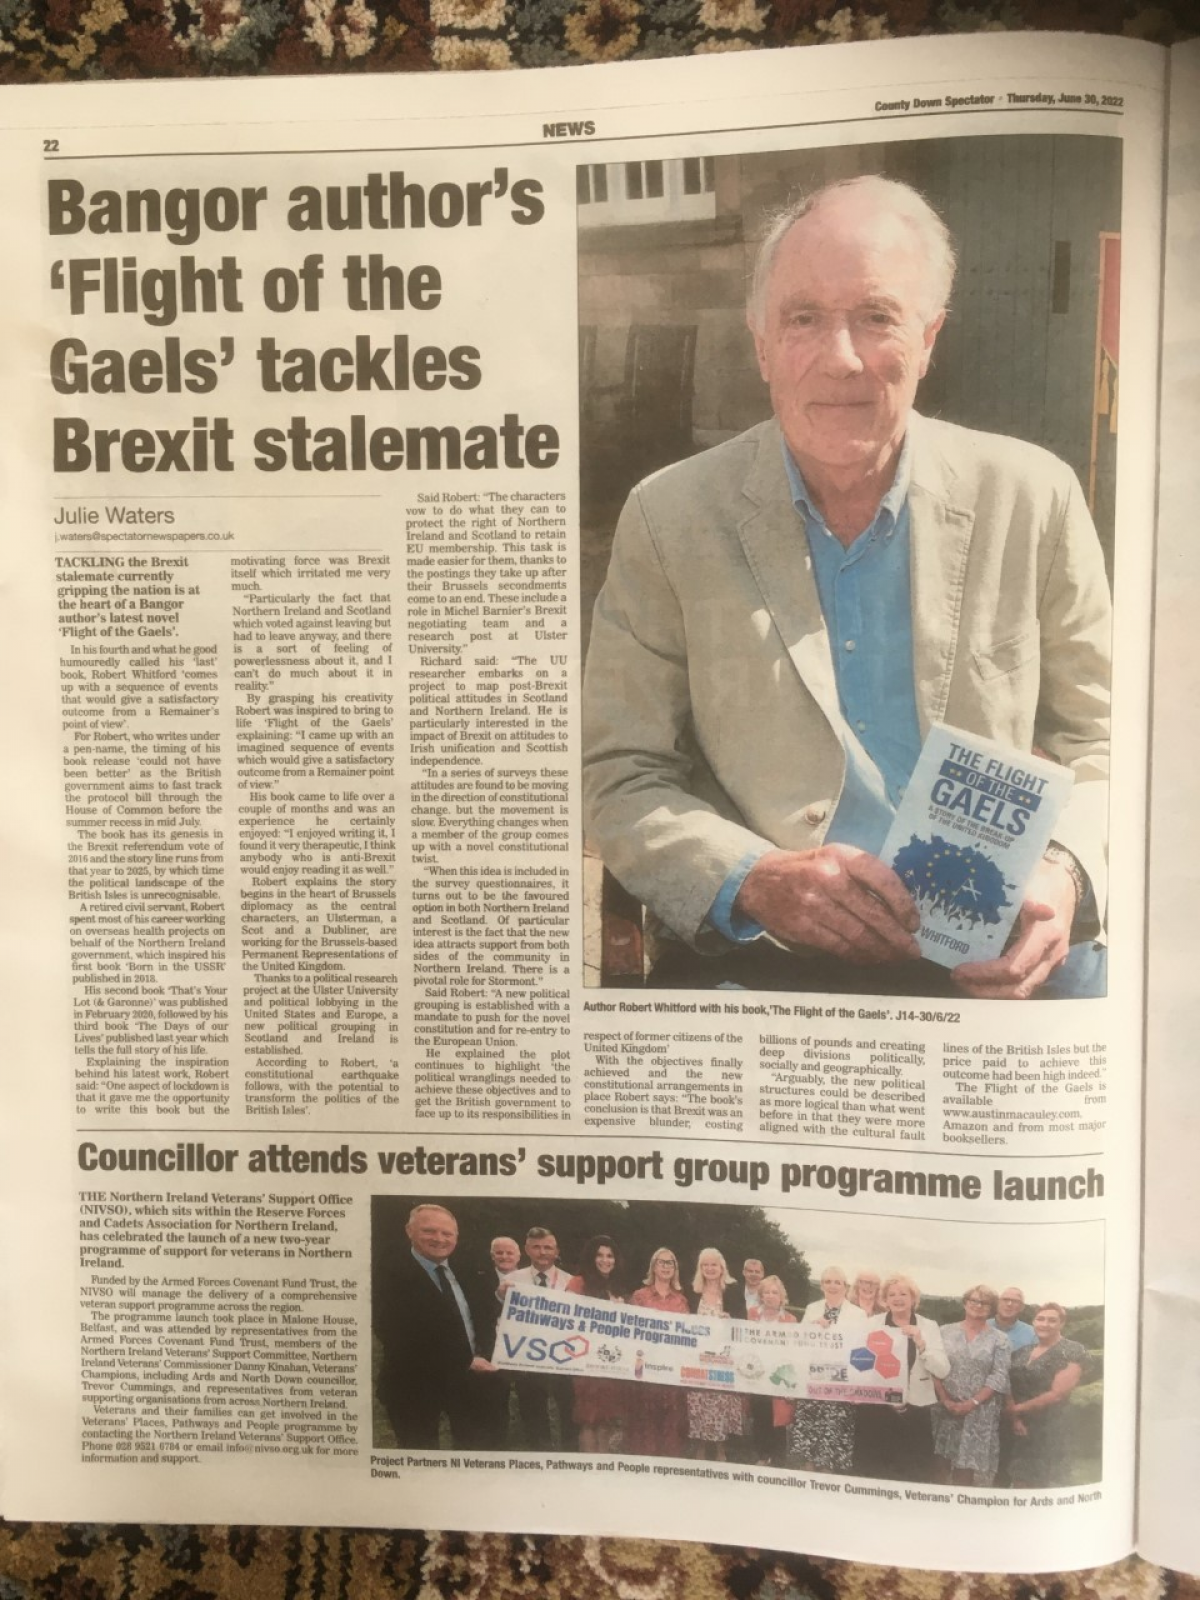 Robert Whitford’s Book was Featured by the Newspaper County Down Spectator